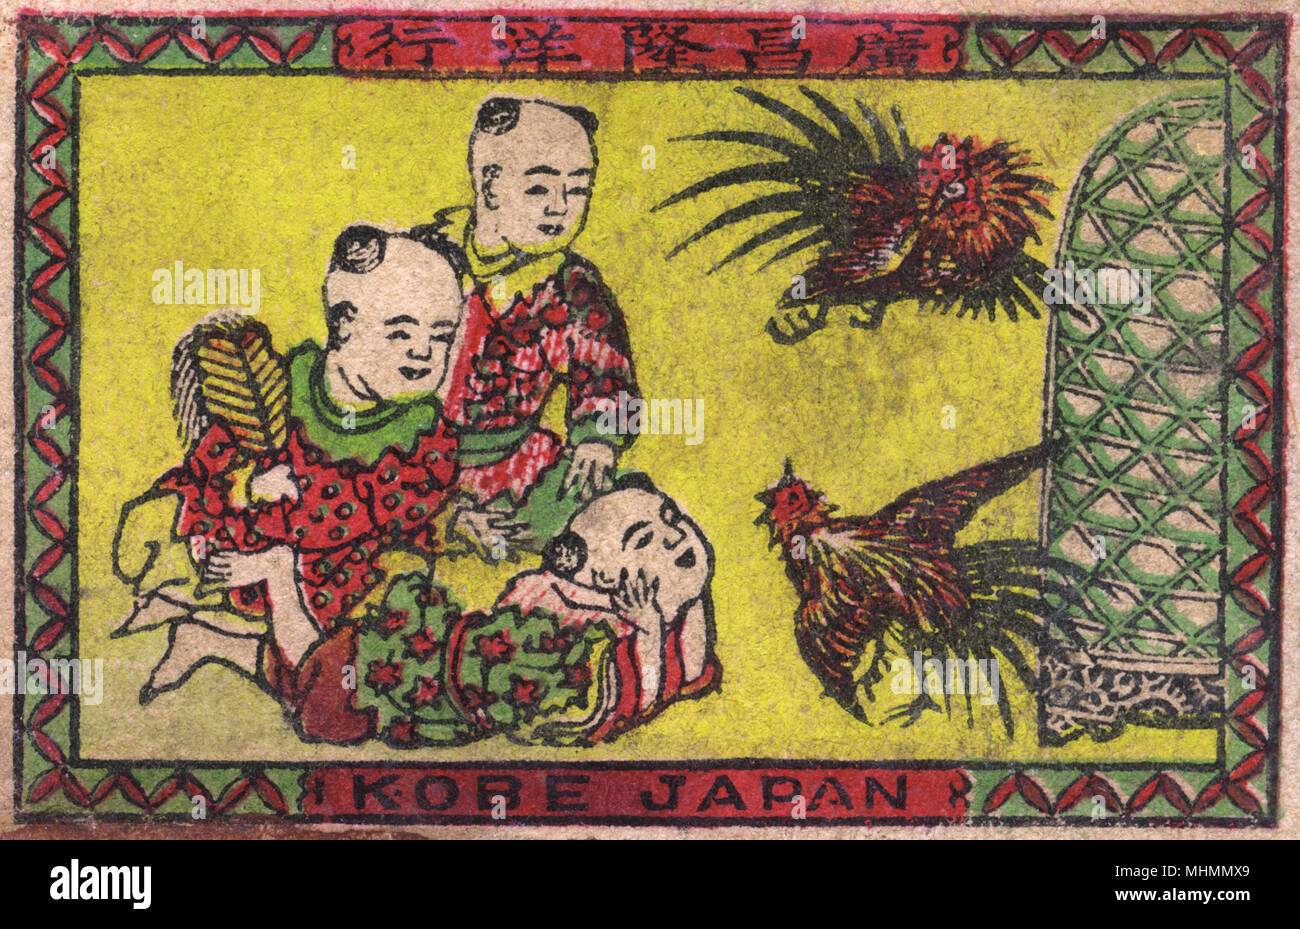 Old Japanese Matchbox label with three men watching chickens Stock Photo